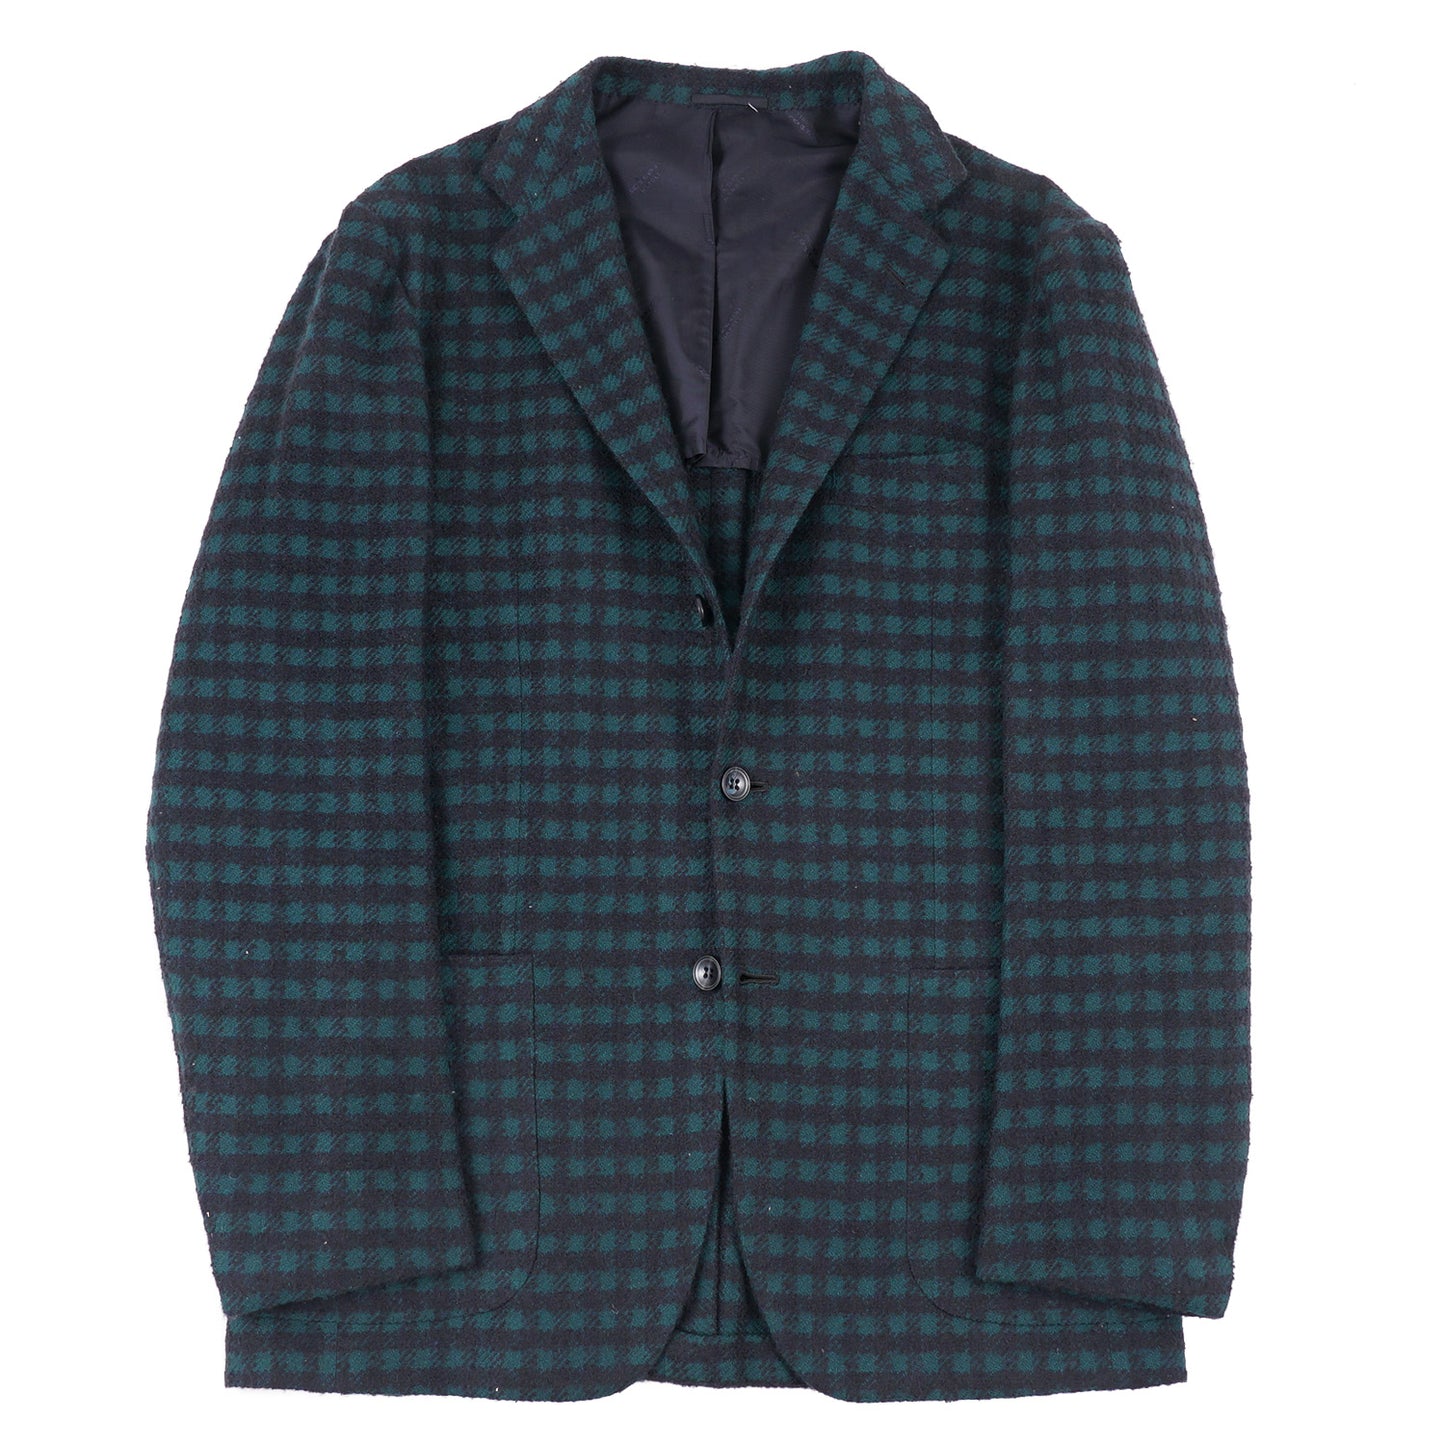 Kiton Relaxed-Fit Cashmere Sport Coat - Top Shelf Apparel